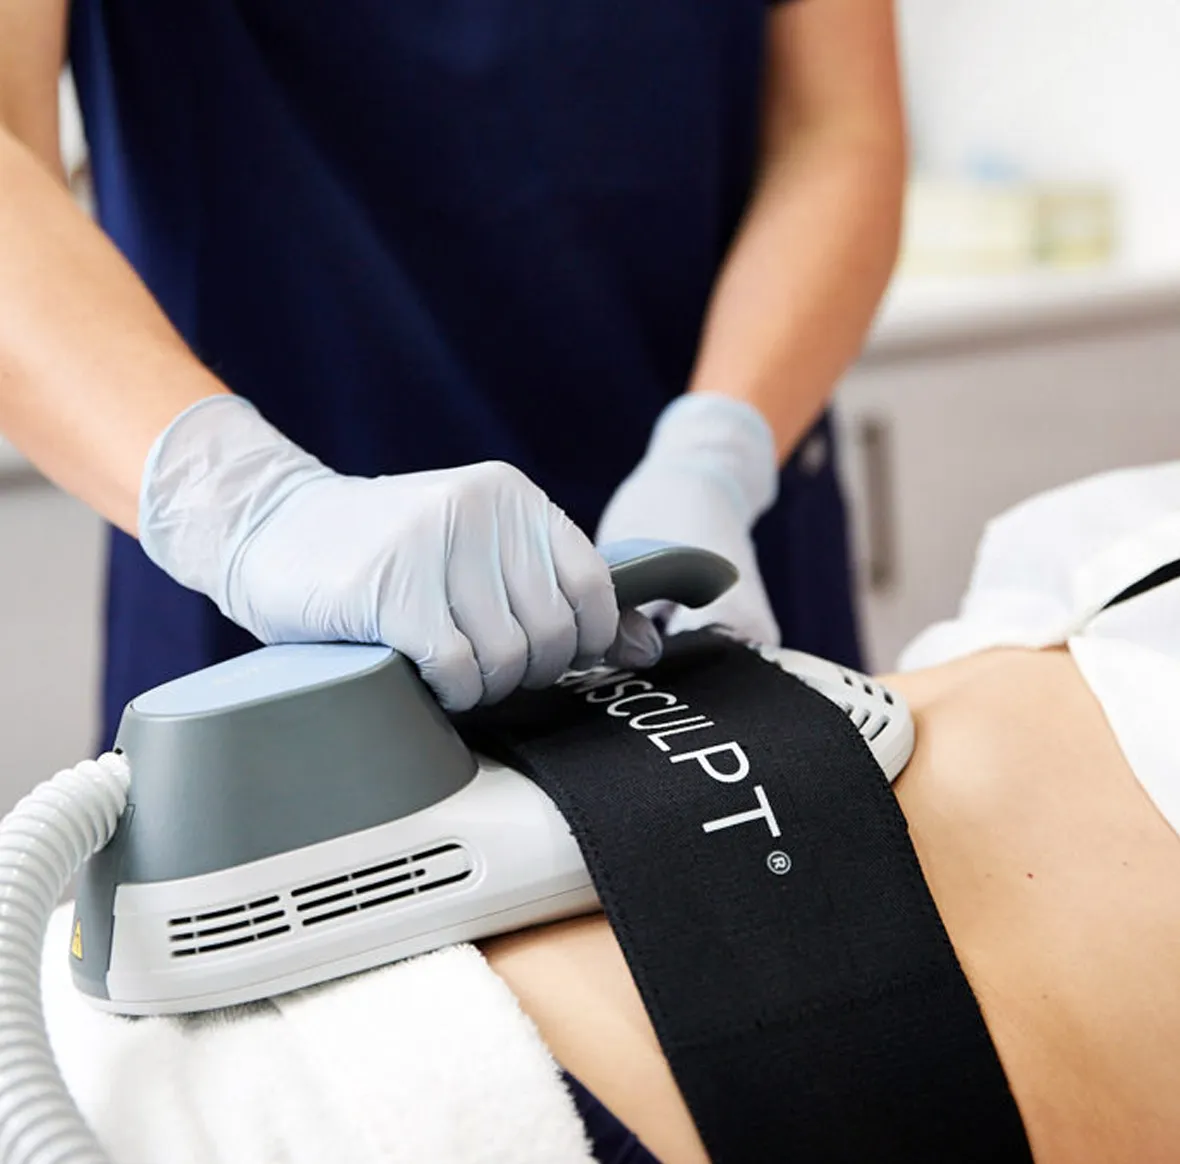 A Sexual Health Expert in Los Angeles is performing a non-invasive body sculpting treatment on a client using a specialized device.